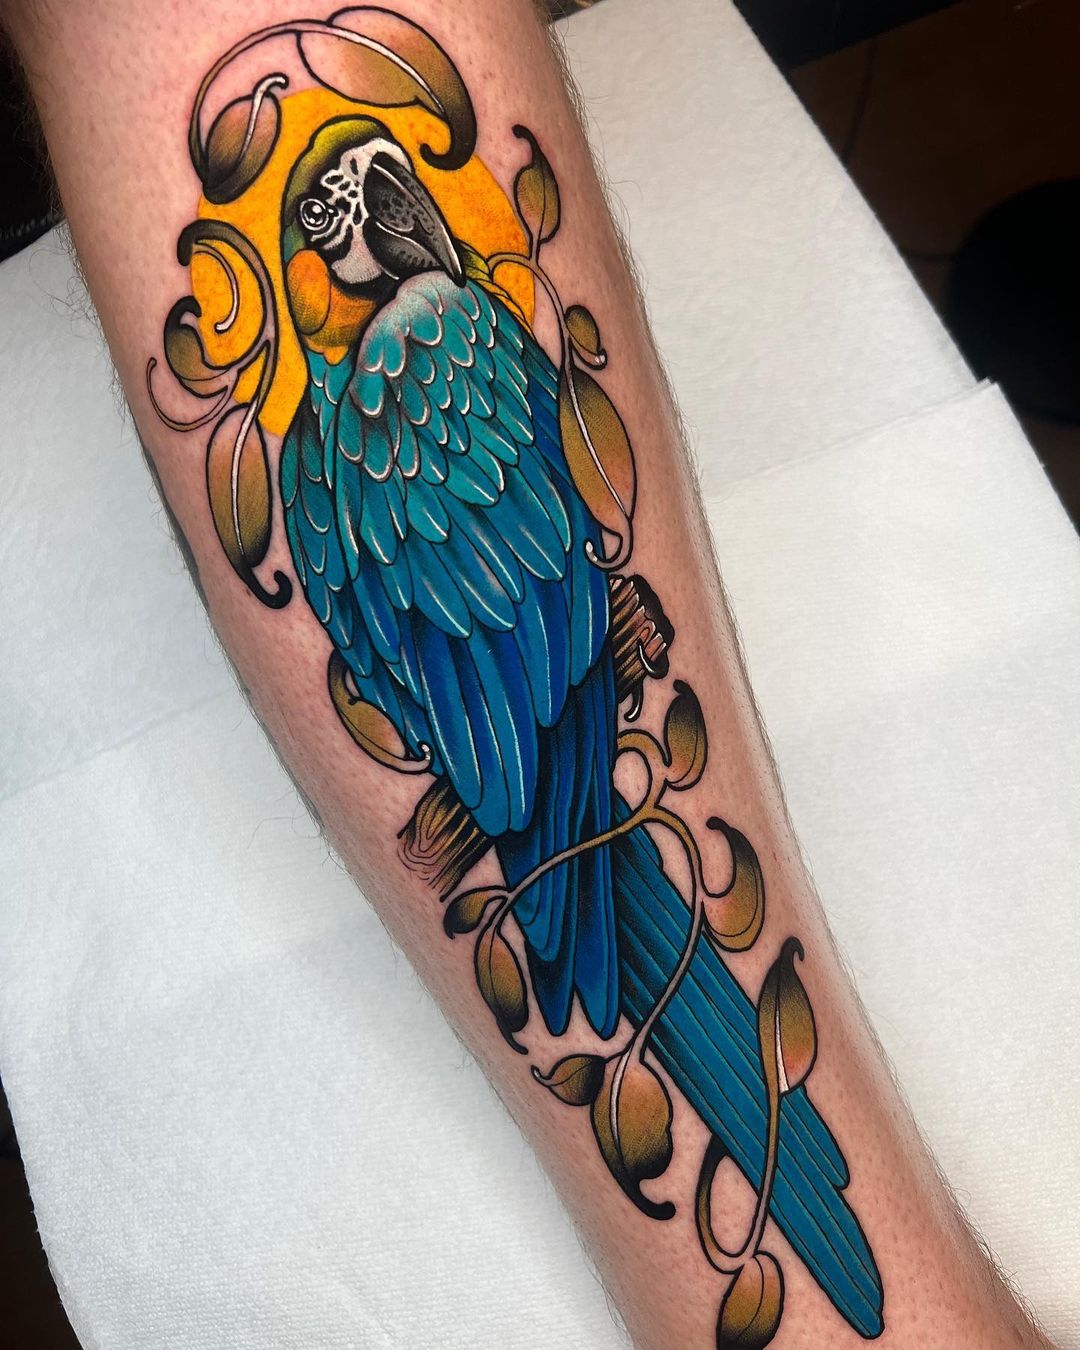 Parrot sleeve tattoo by sulhong tattooer